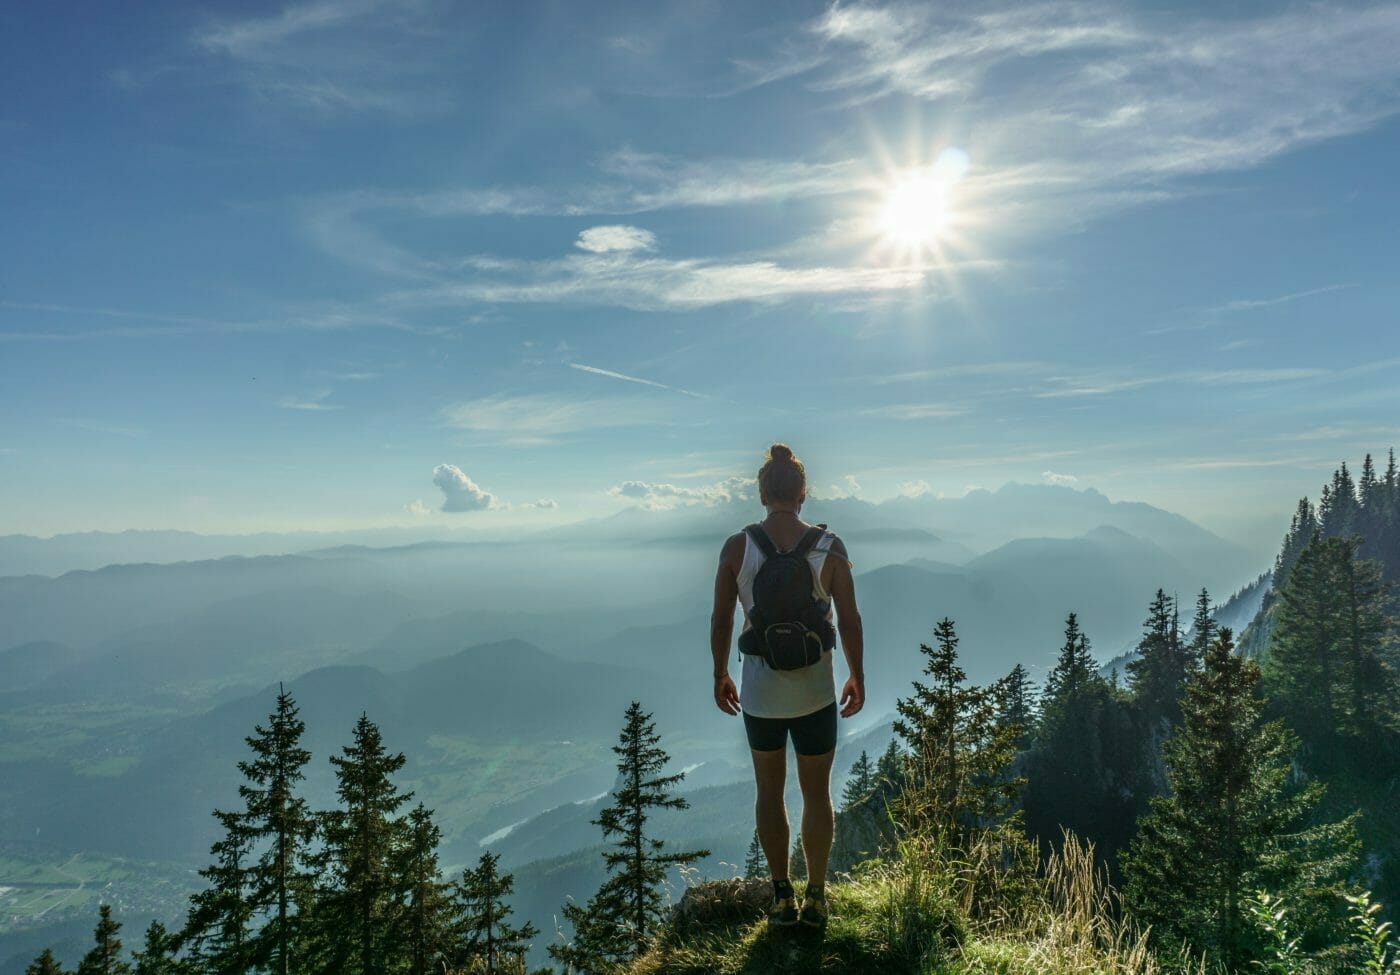 Fear Hiking Solo? Tips To Help Get You On The Trail